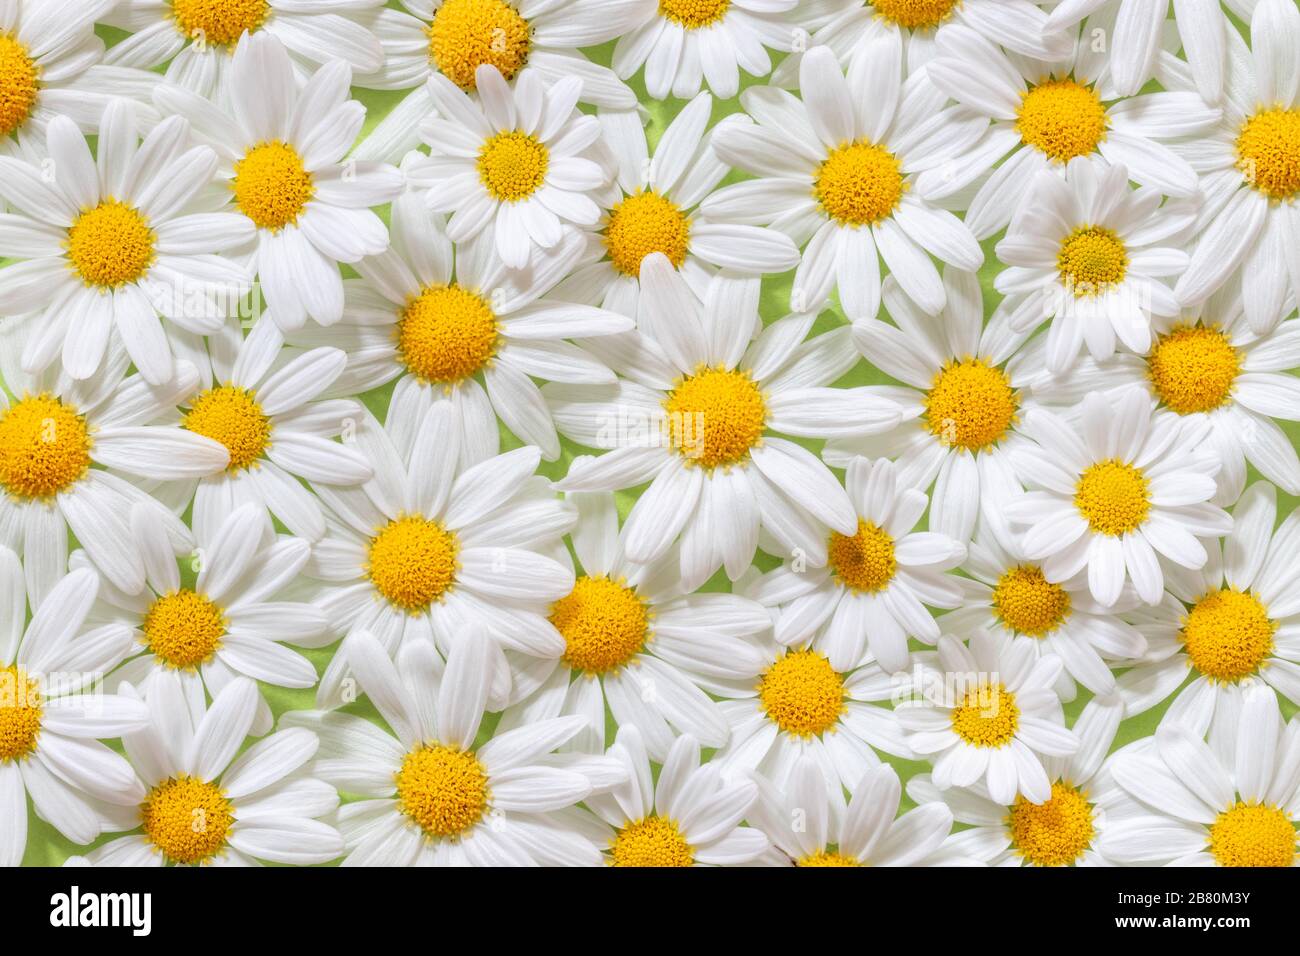 Carpet of flowers of beautiful white daisies (Marguerite) for backgrounds, Germany. Stock Photo